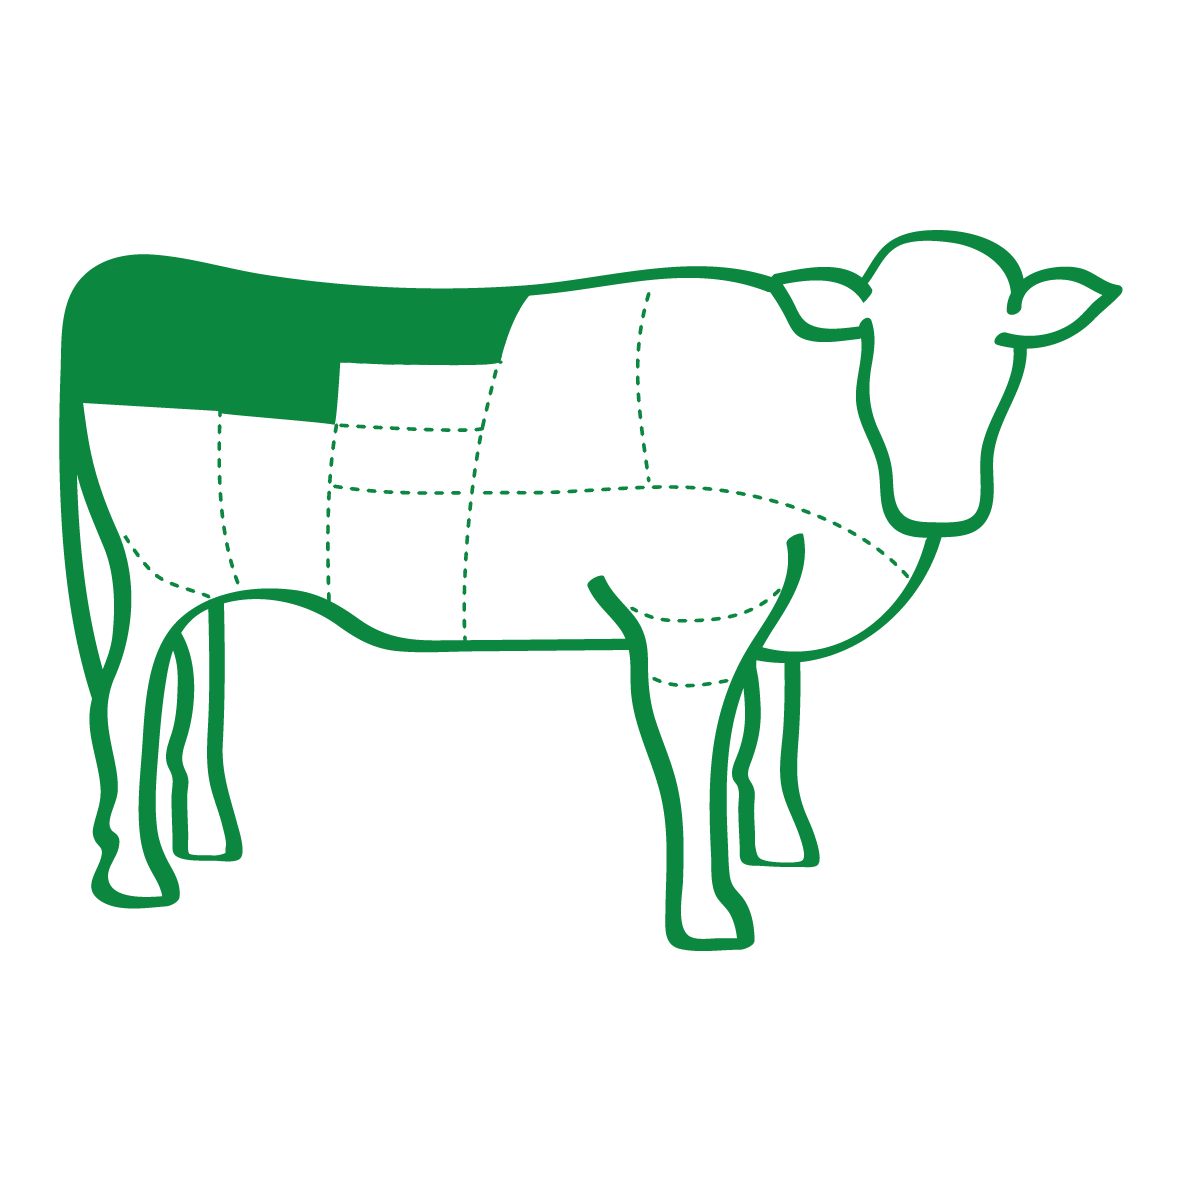 an illustration of a beef carcass showing where medallions come from